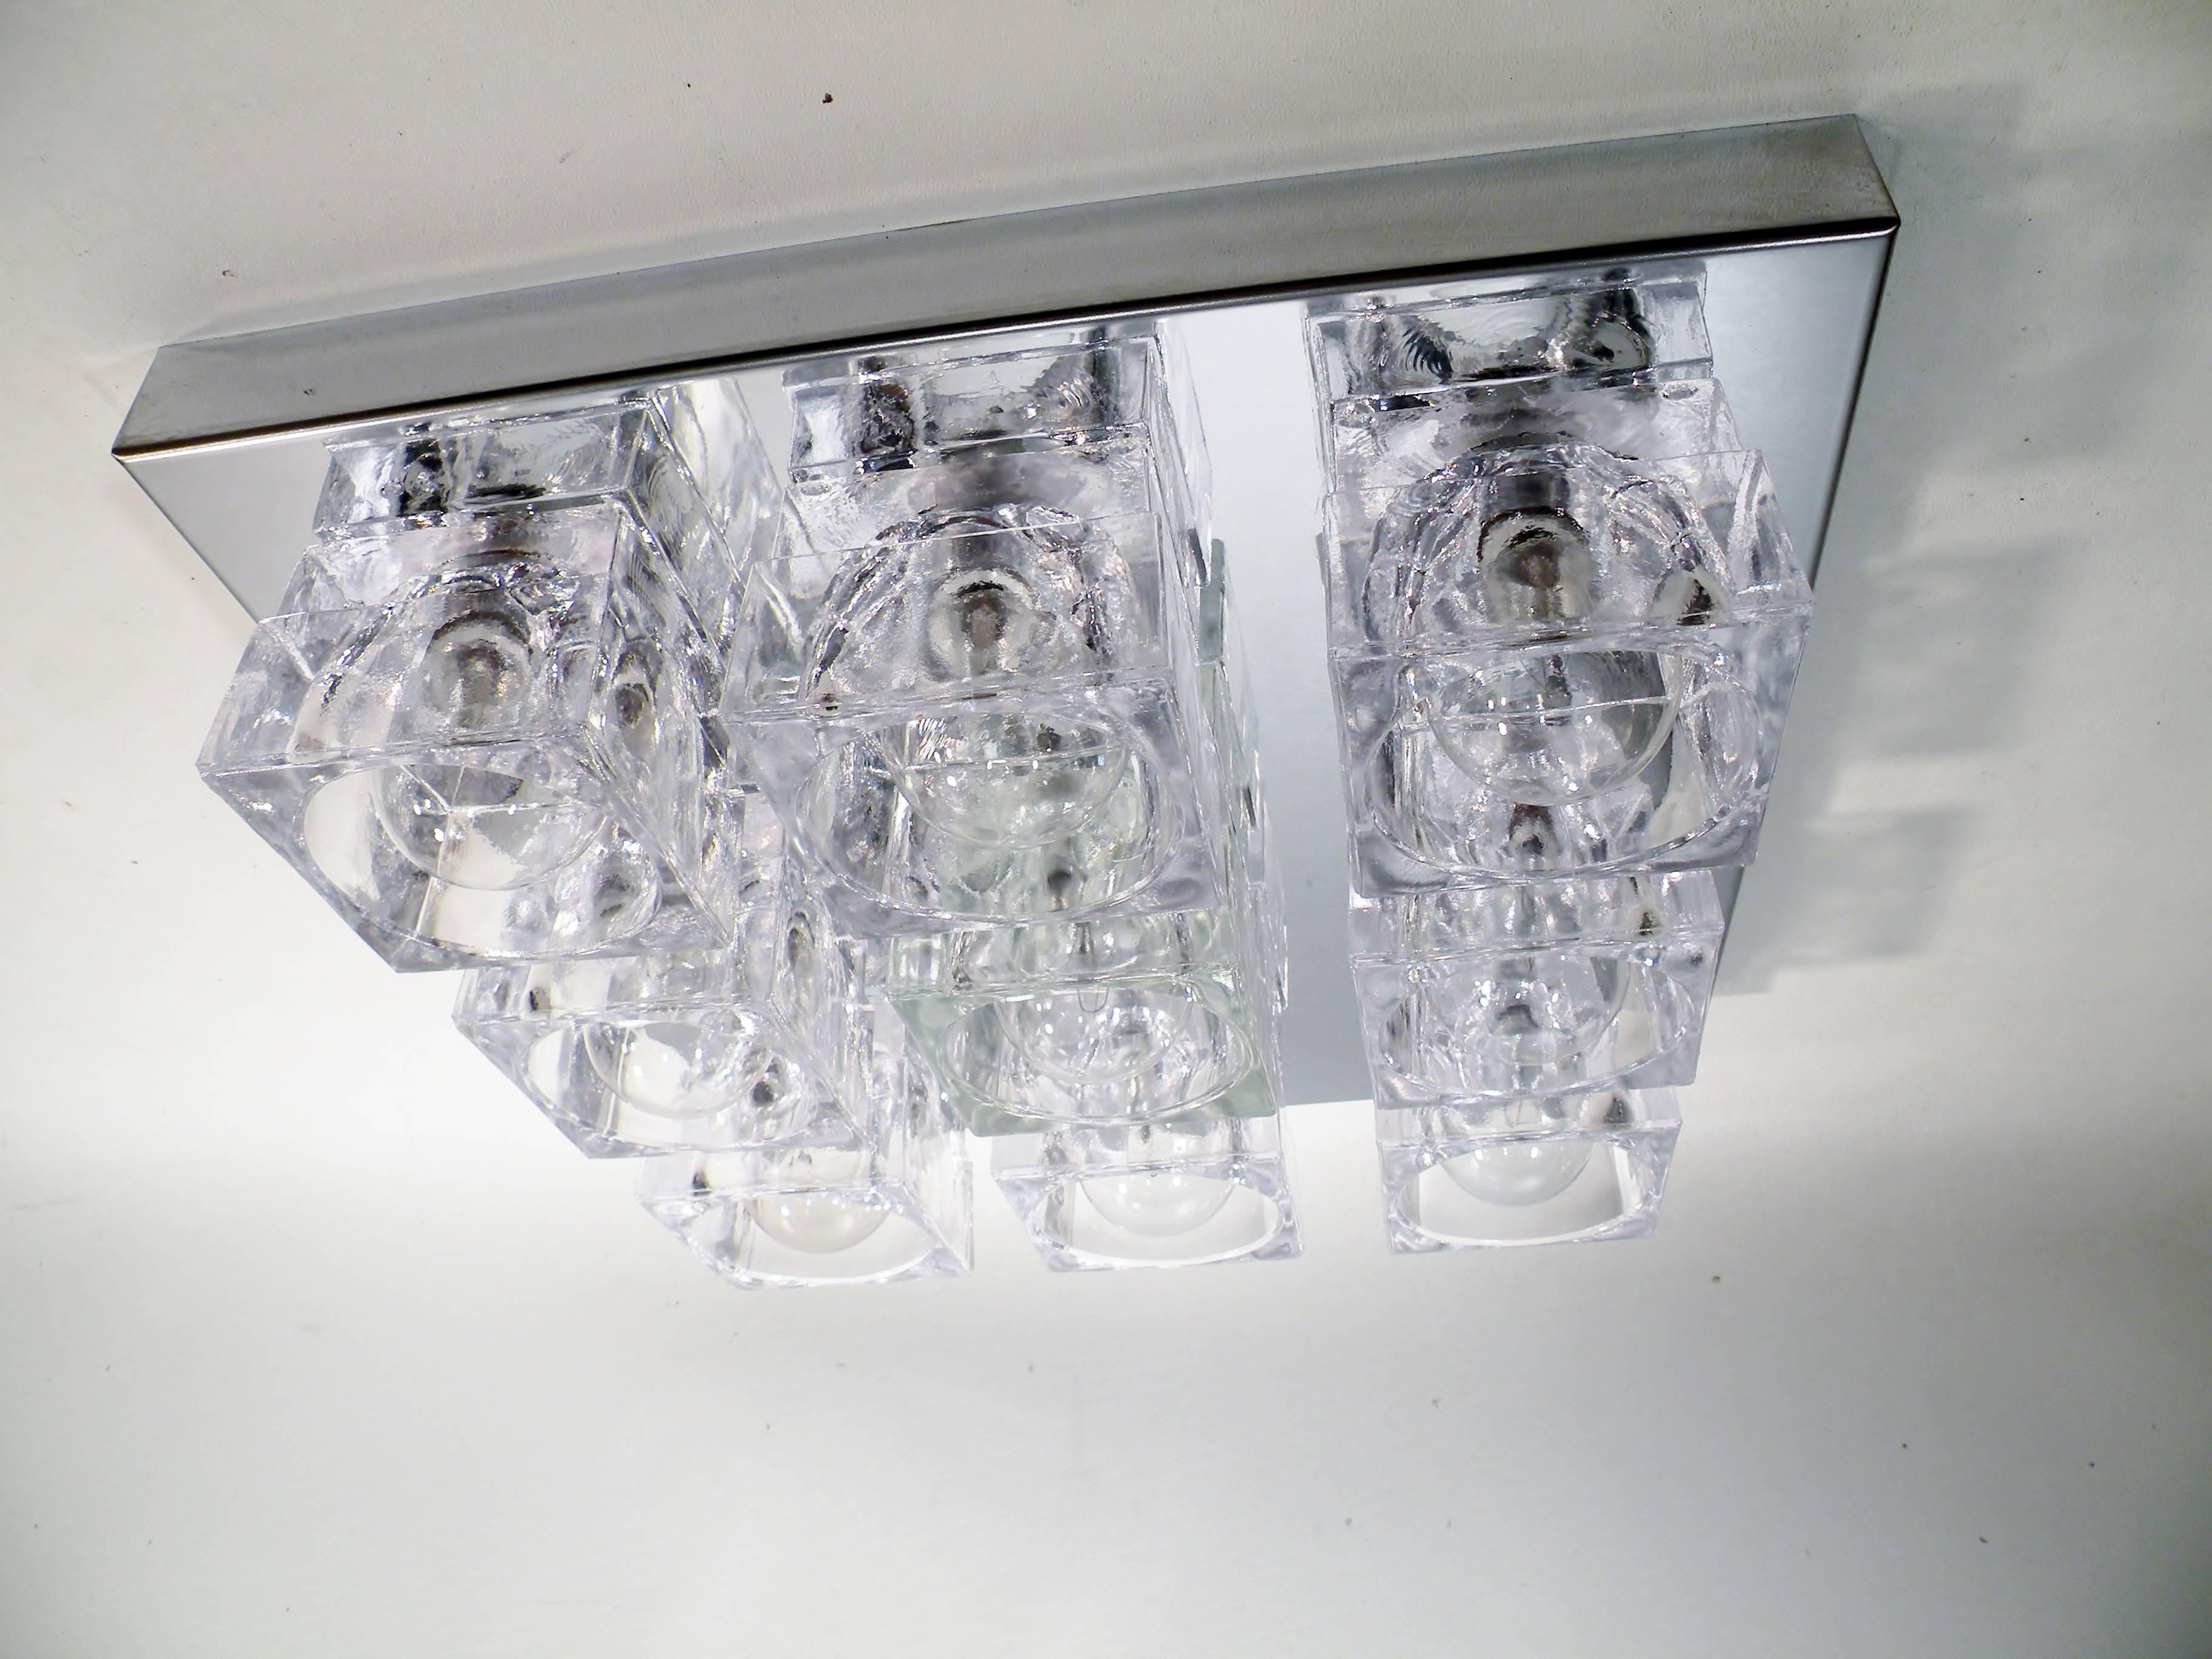 Square nine-light flush mounted sconce or ceiling lamp by Gaetano Sciolari, dating to the 1960s. This original example has nine square crystal cubes on chrome-plated steel mounting plate. Listed price is per fixture or lamp. Can be hung on ceiling